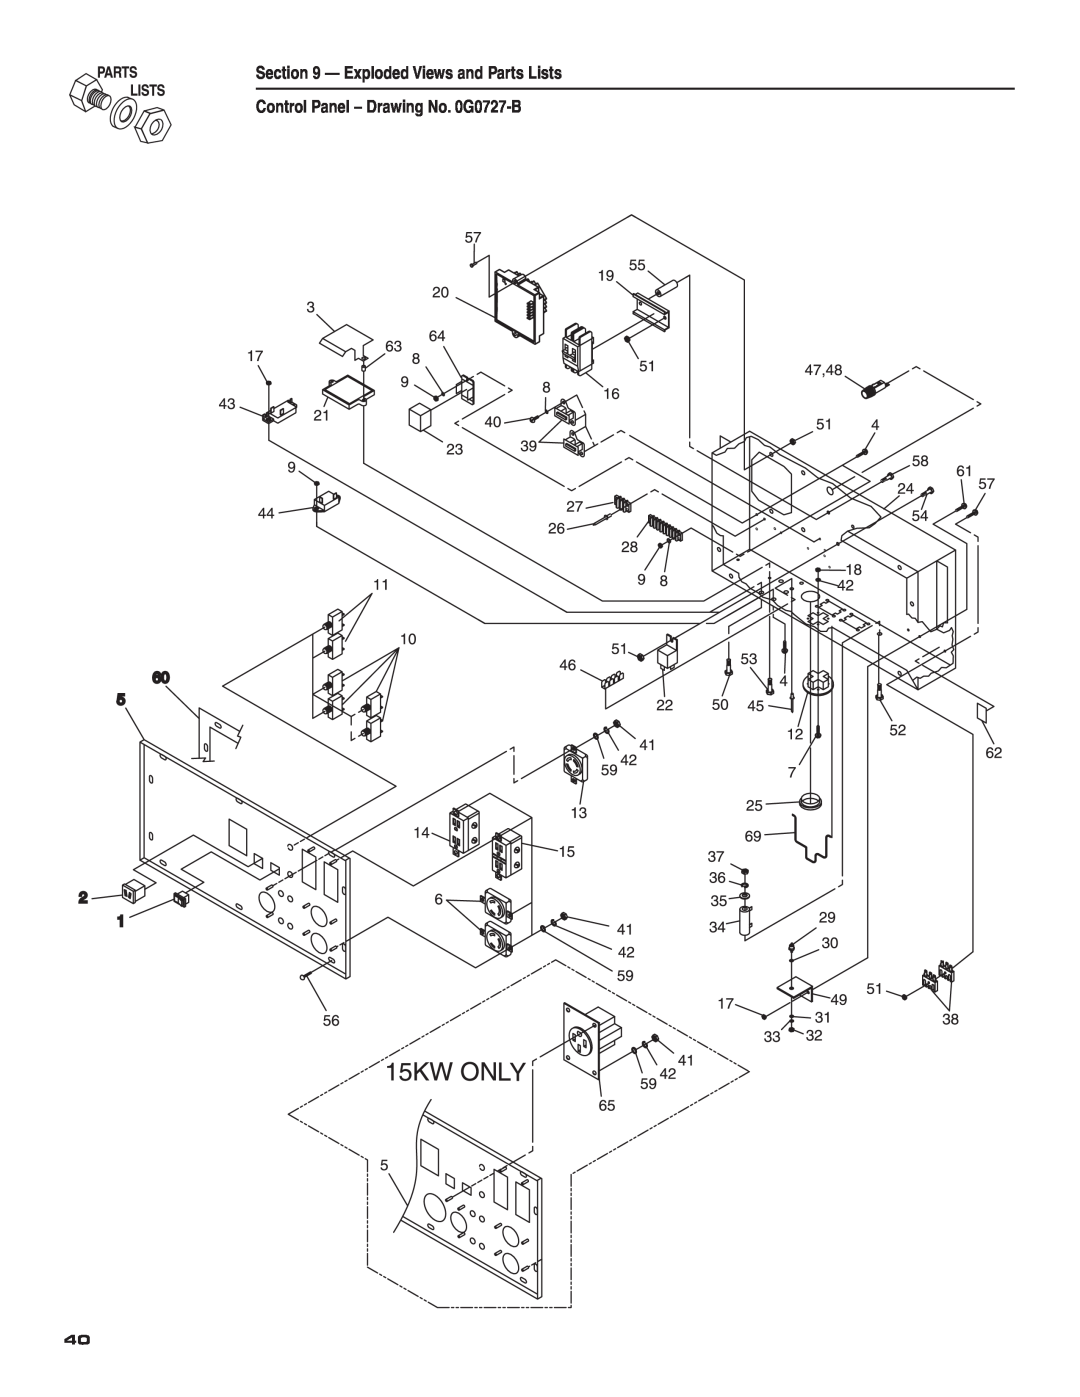 Guardian Technologies 004583-0 owner manual Exploded Views and Parts Lists, Control Panel - Drawing No. 0G0727-B 